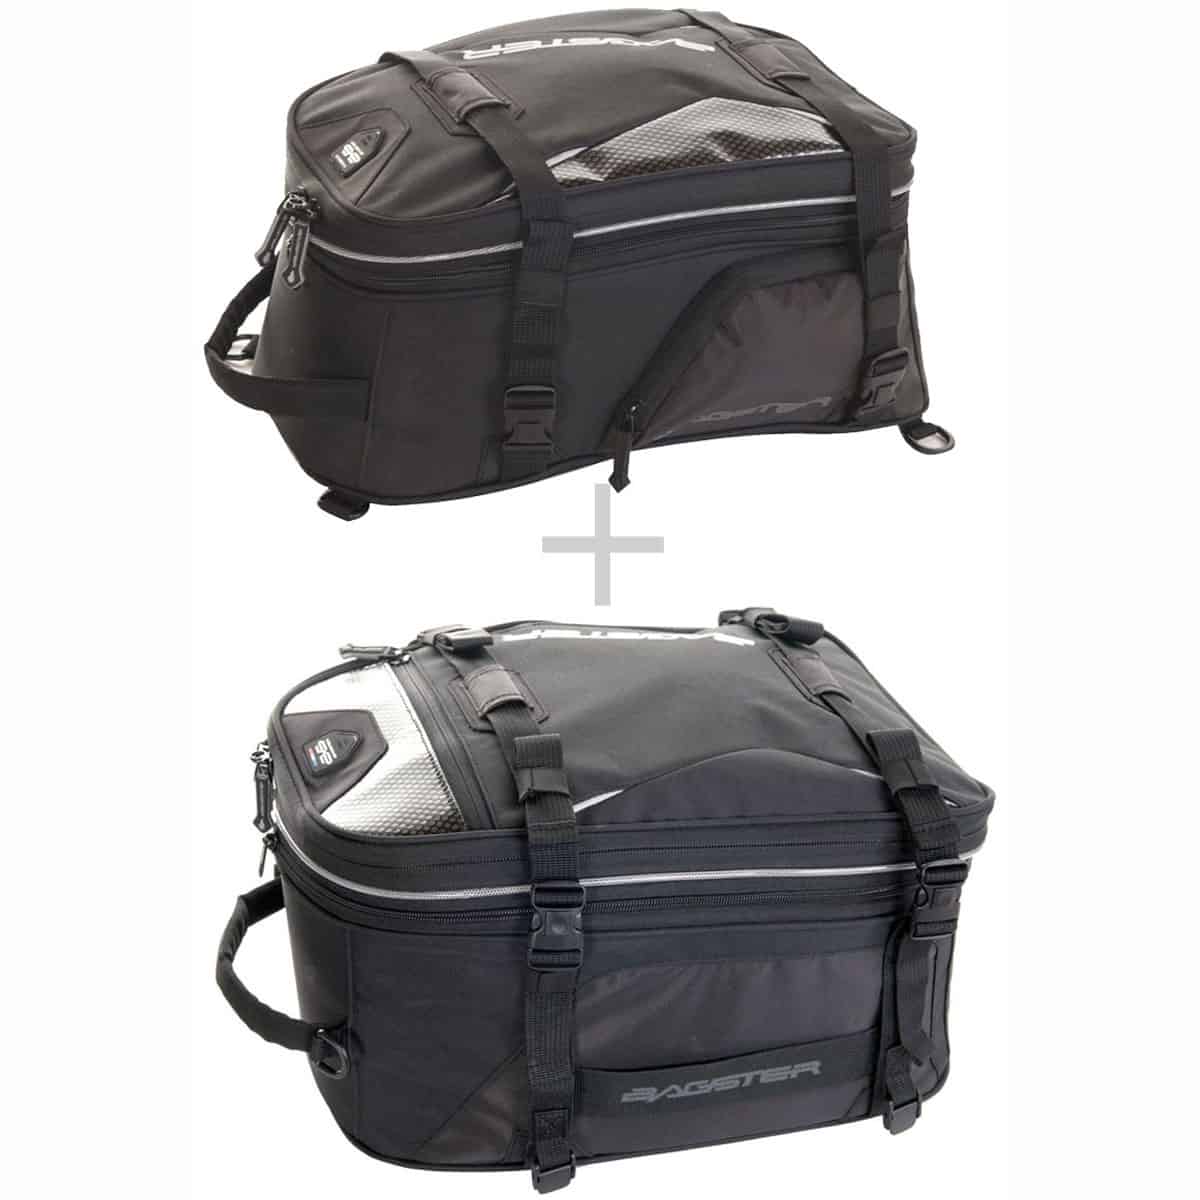 Bagster Modulo Tail motorcycle luggage system: The tail pack system that adapts to your motorbike tour 2